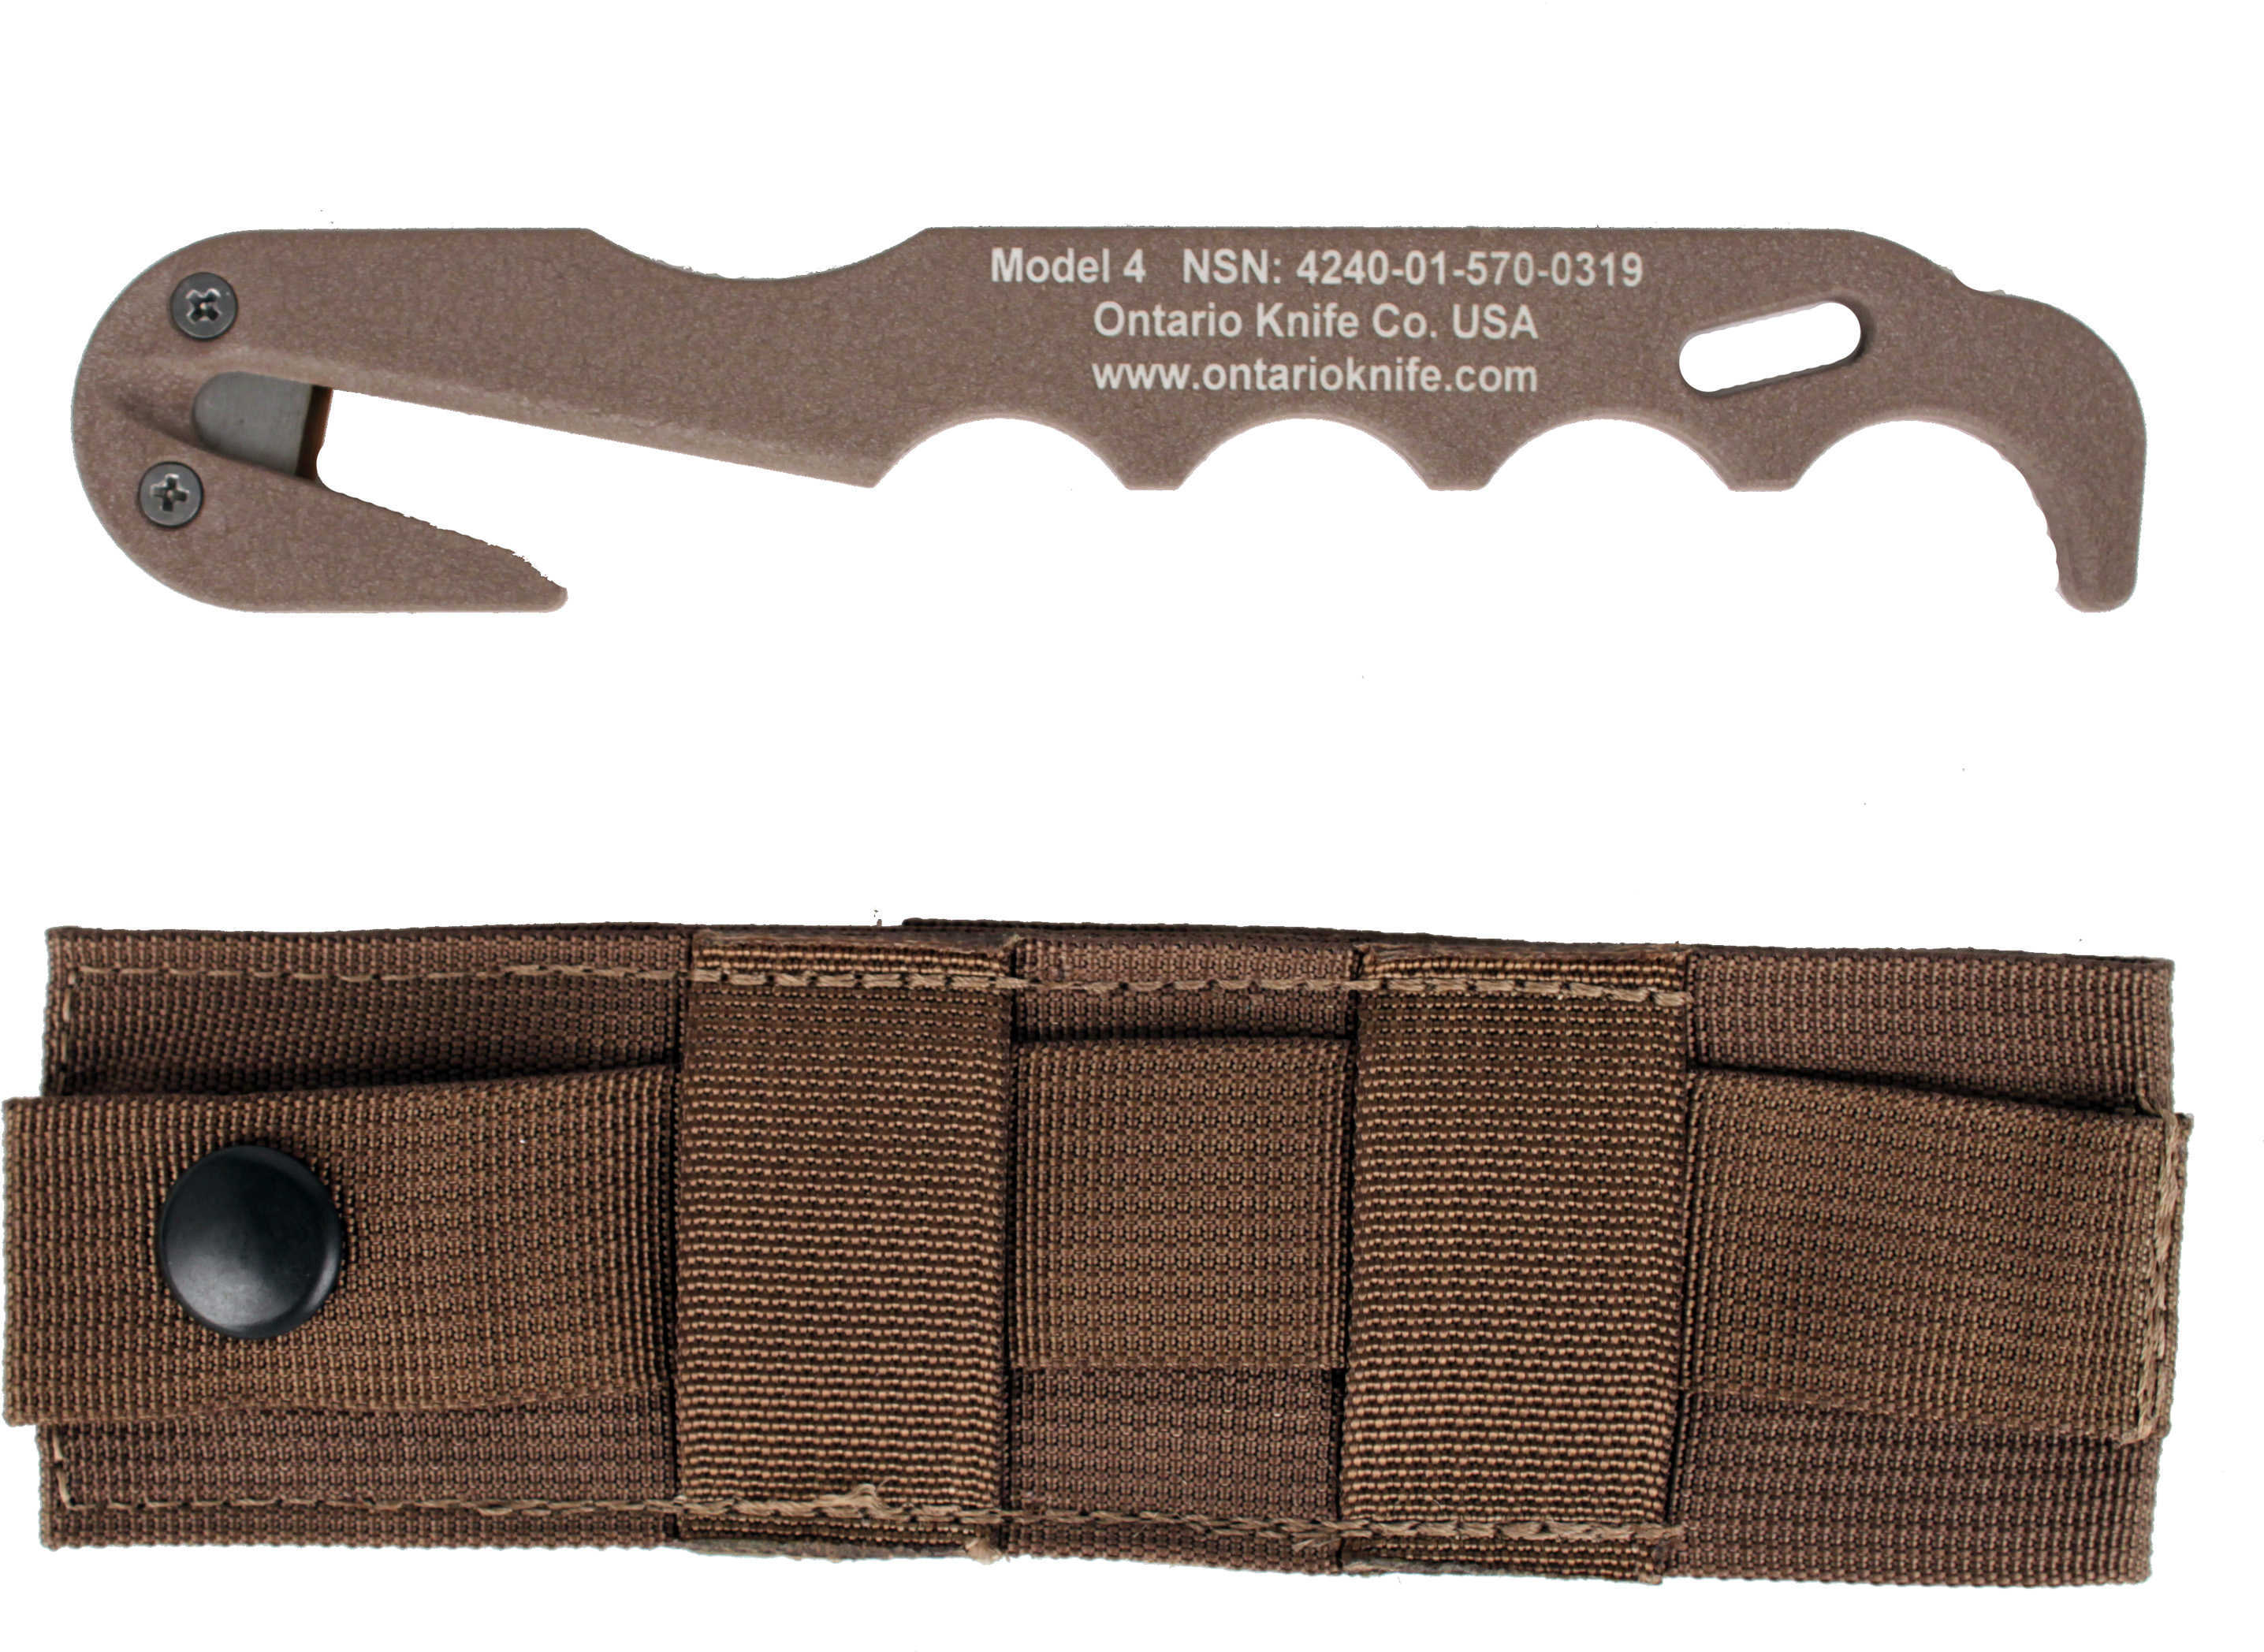 Ontario Knife Company Strap Cutter Model 4, CB, Rescue Tool 1431